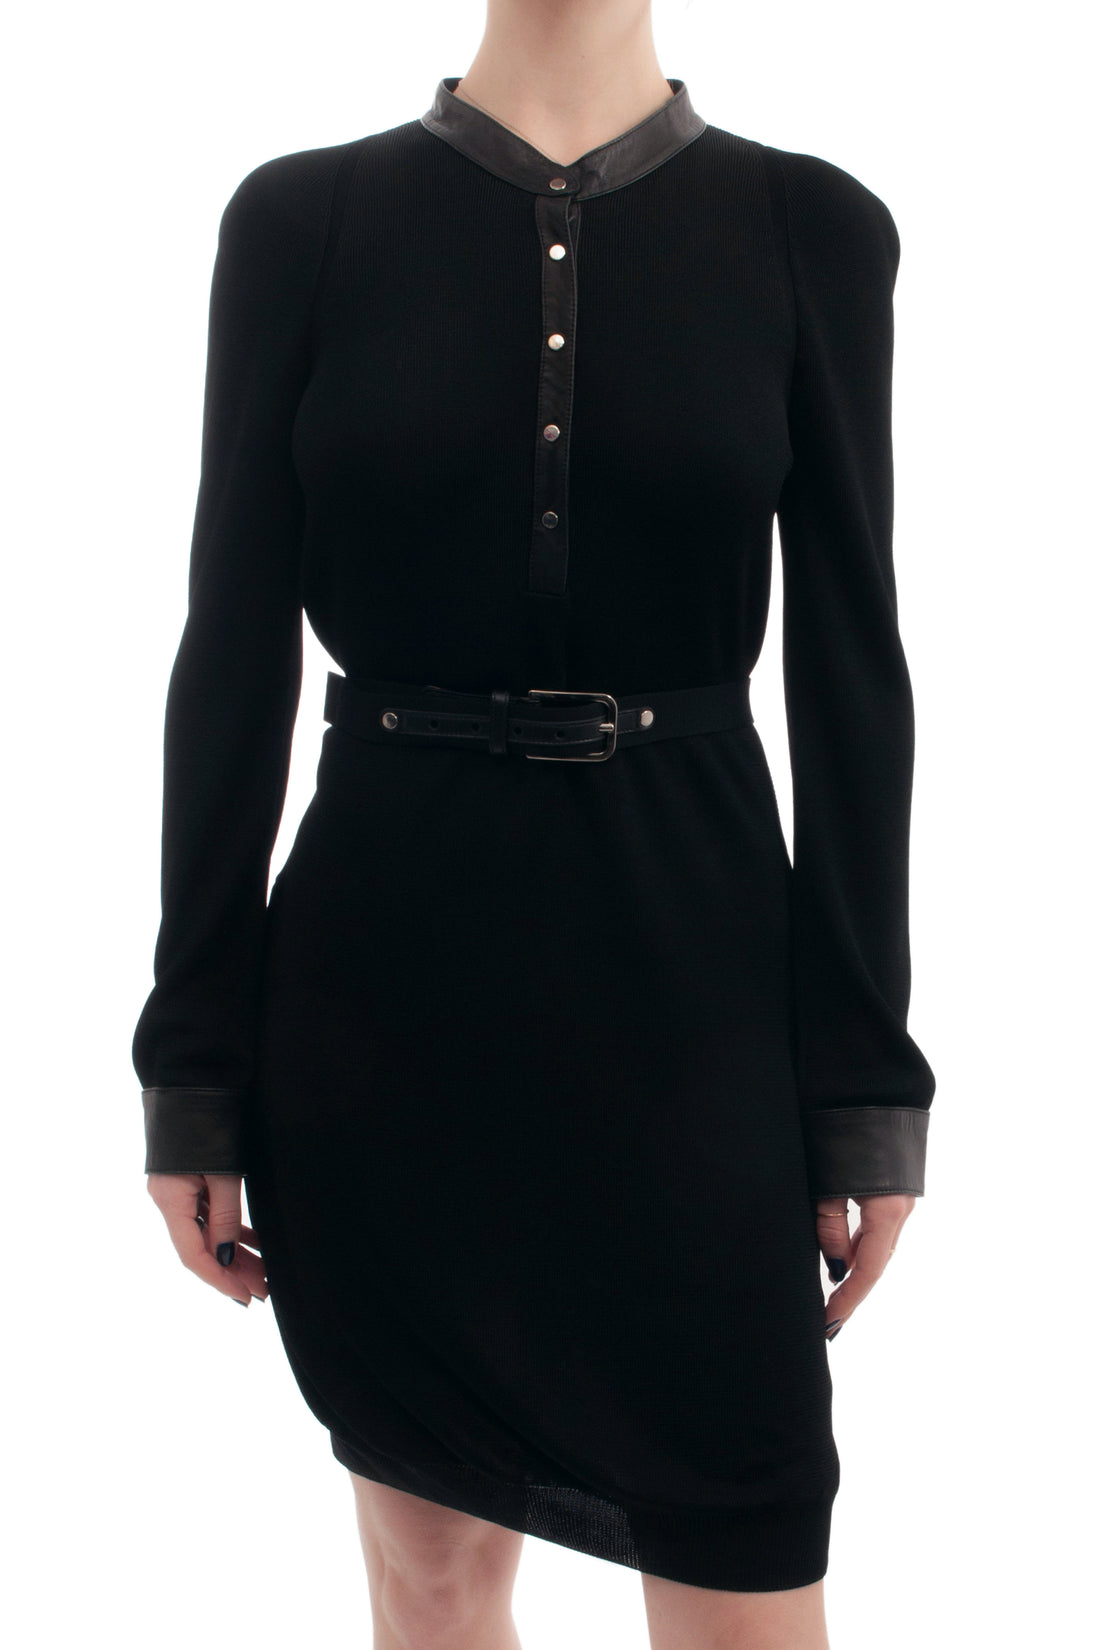 Gucci Black Knit Jersey Belted Dress with Leather trim